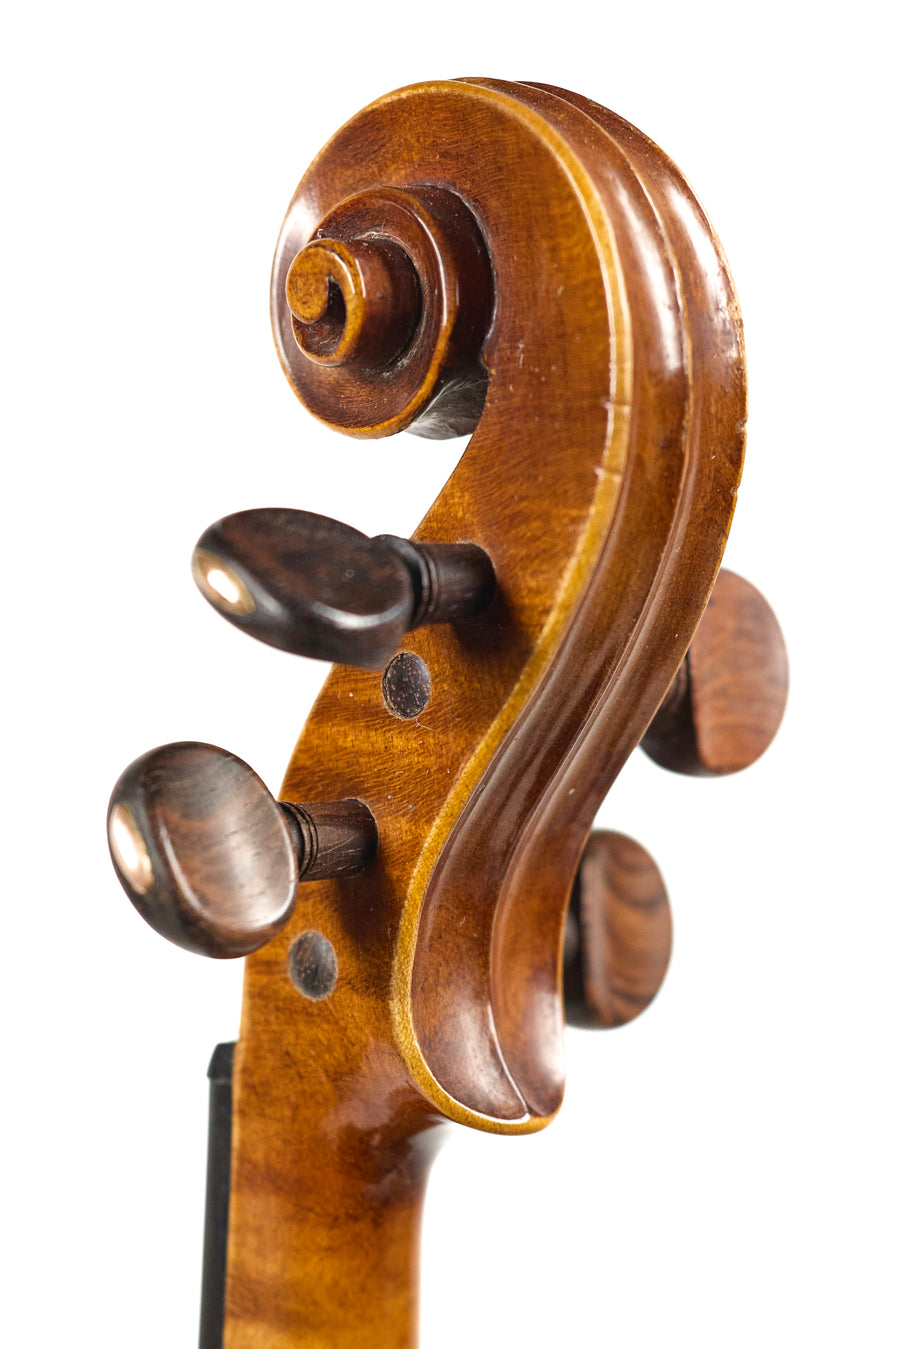 A French Violin By Francois Salzard, Between 1836 And About 1840.